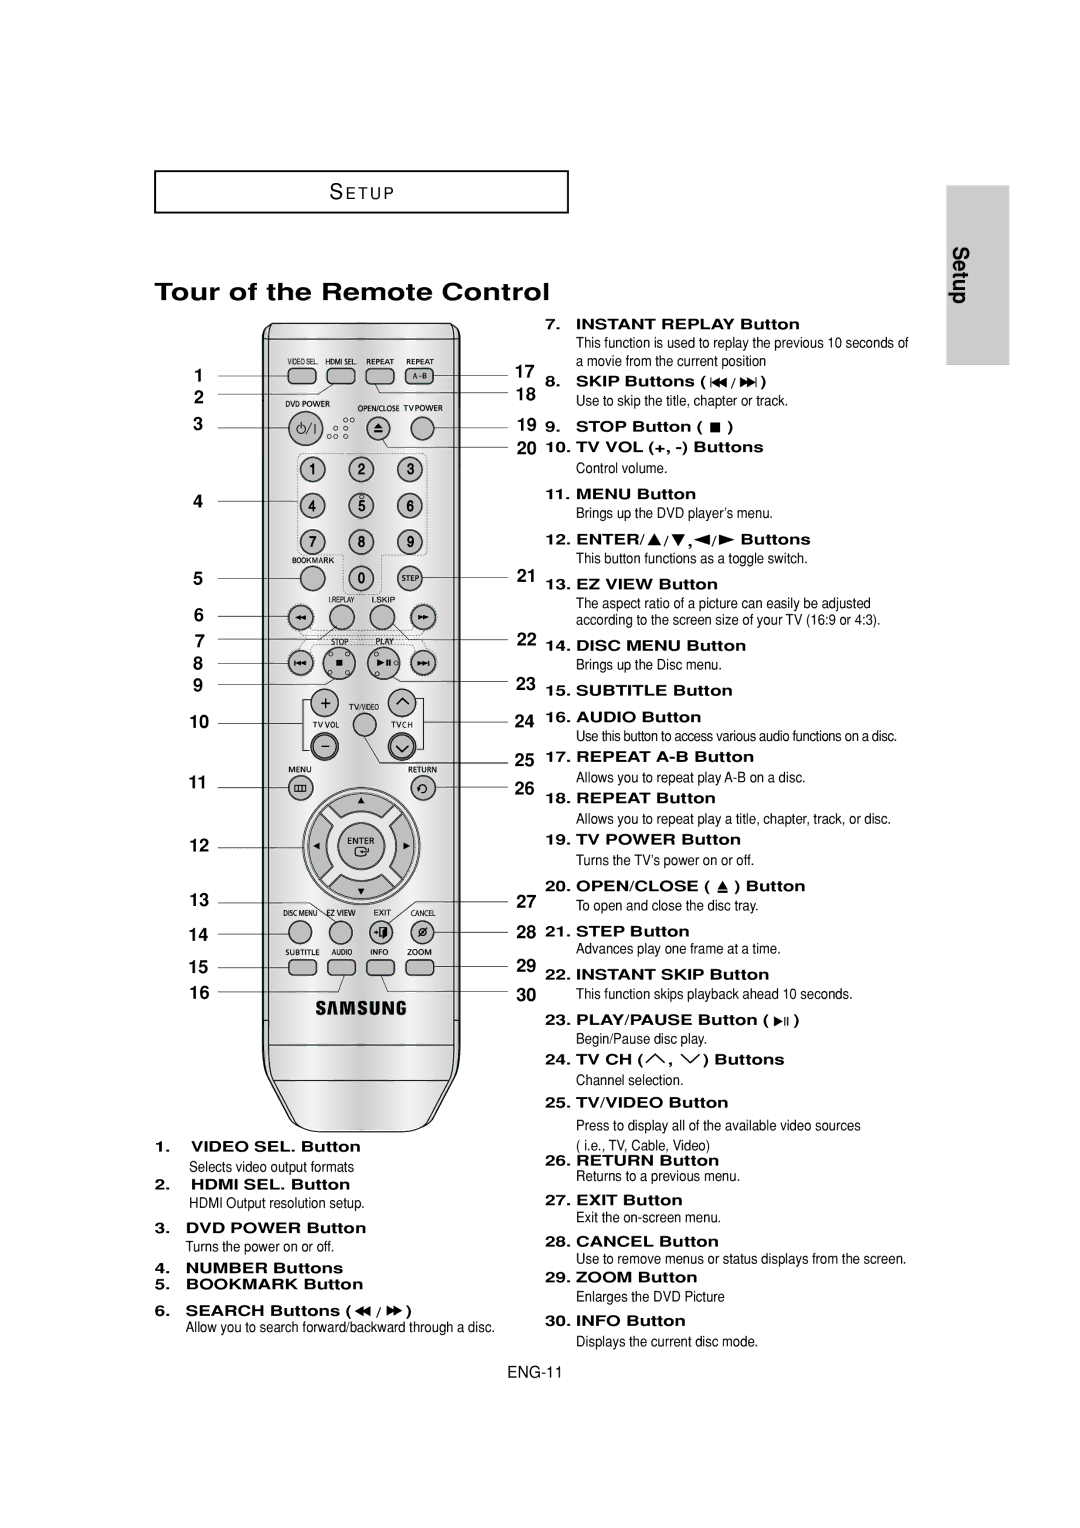 Samsung DVD-1080P7 manual Tour of the Remote Control 